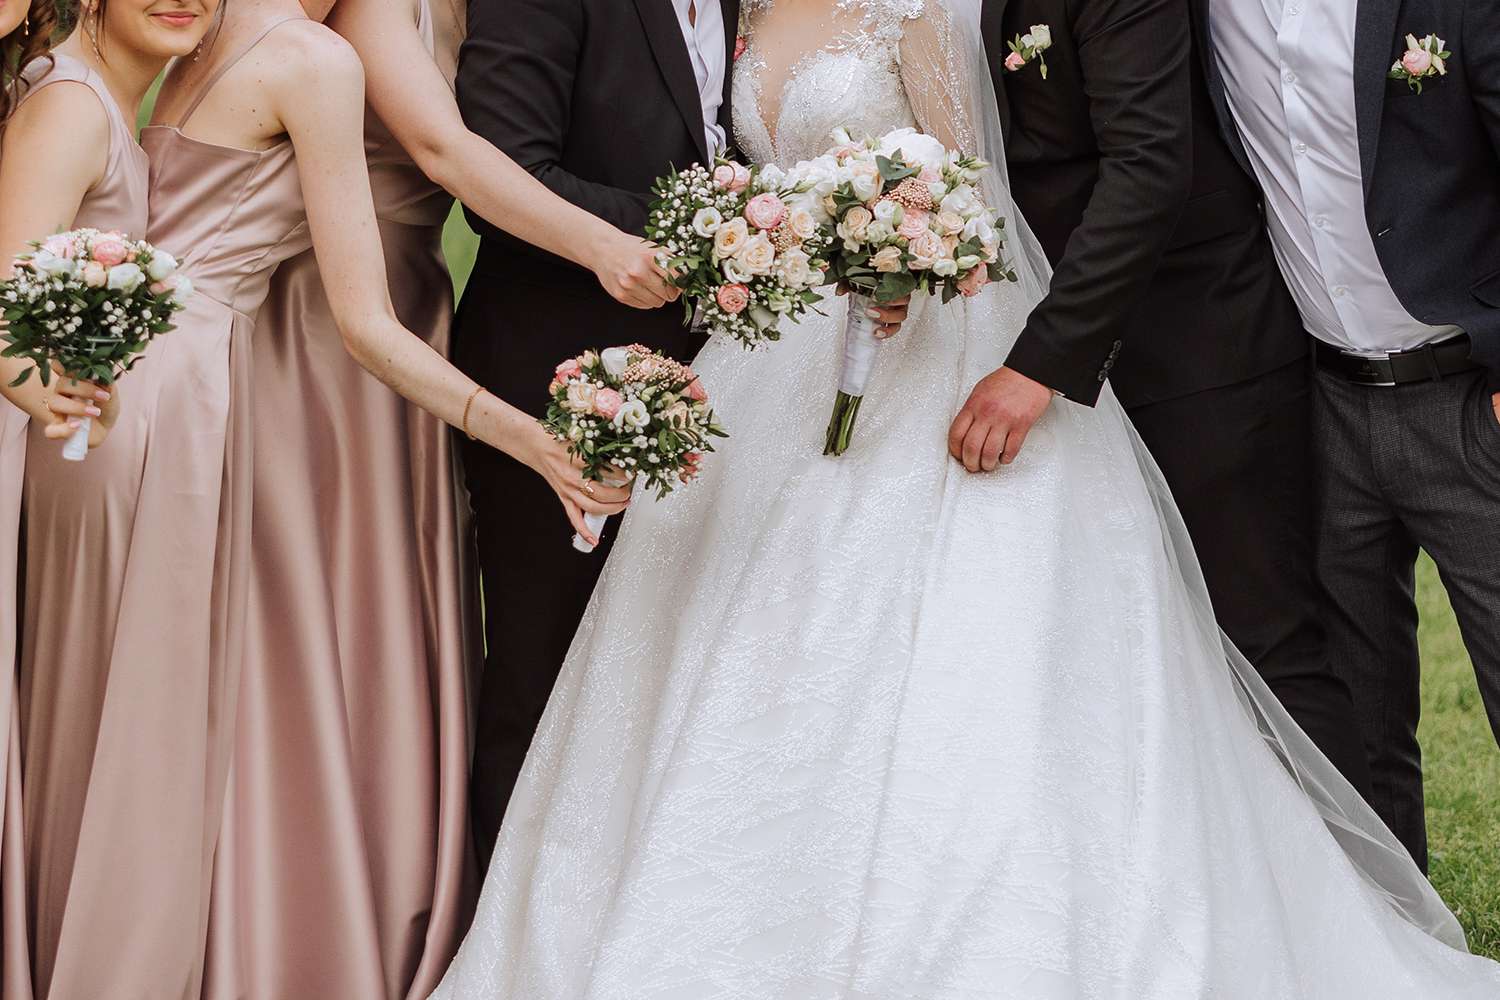 Groom's Disgruntled Sister-in-Law Hated How She Looked in Family Wedding Pics So He Cropped Her Out — Now She's Mad